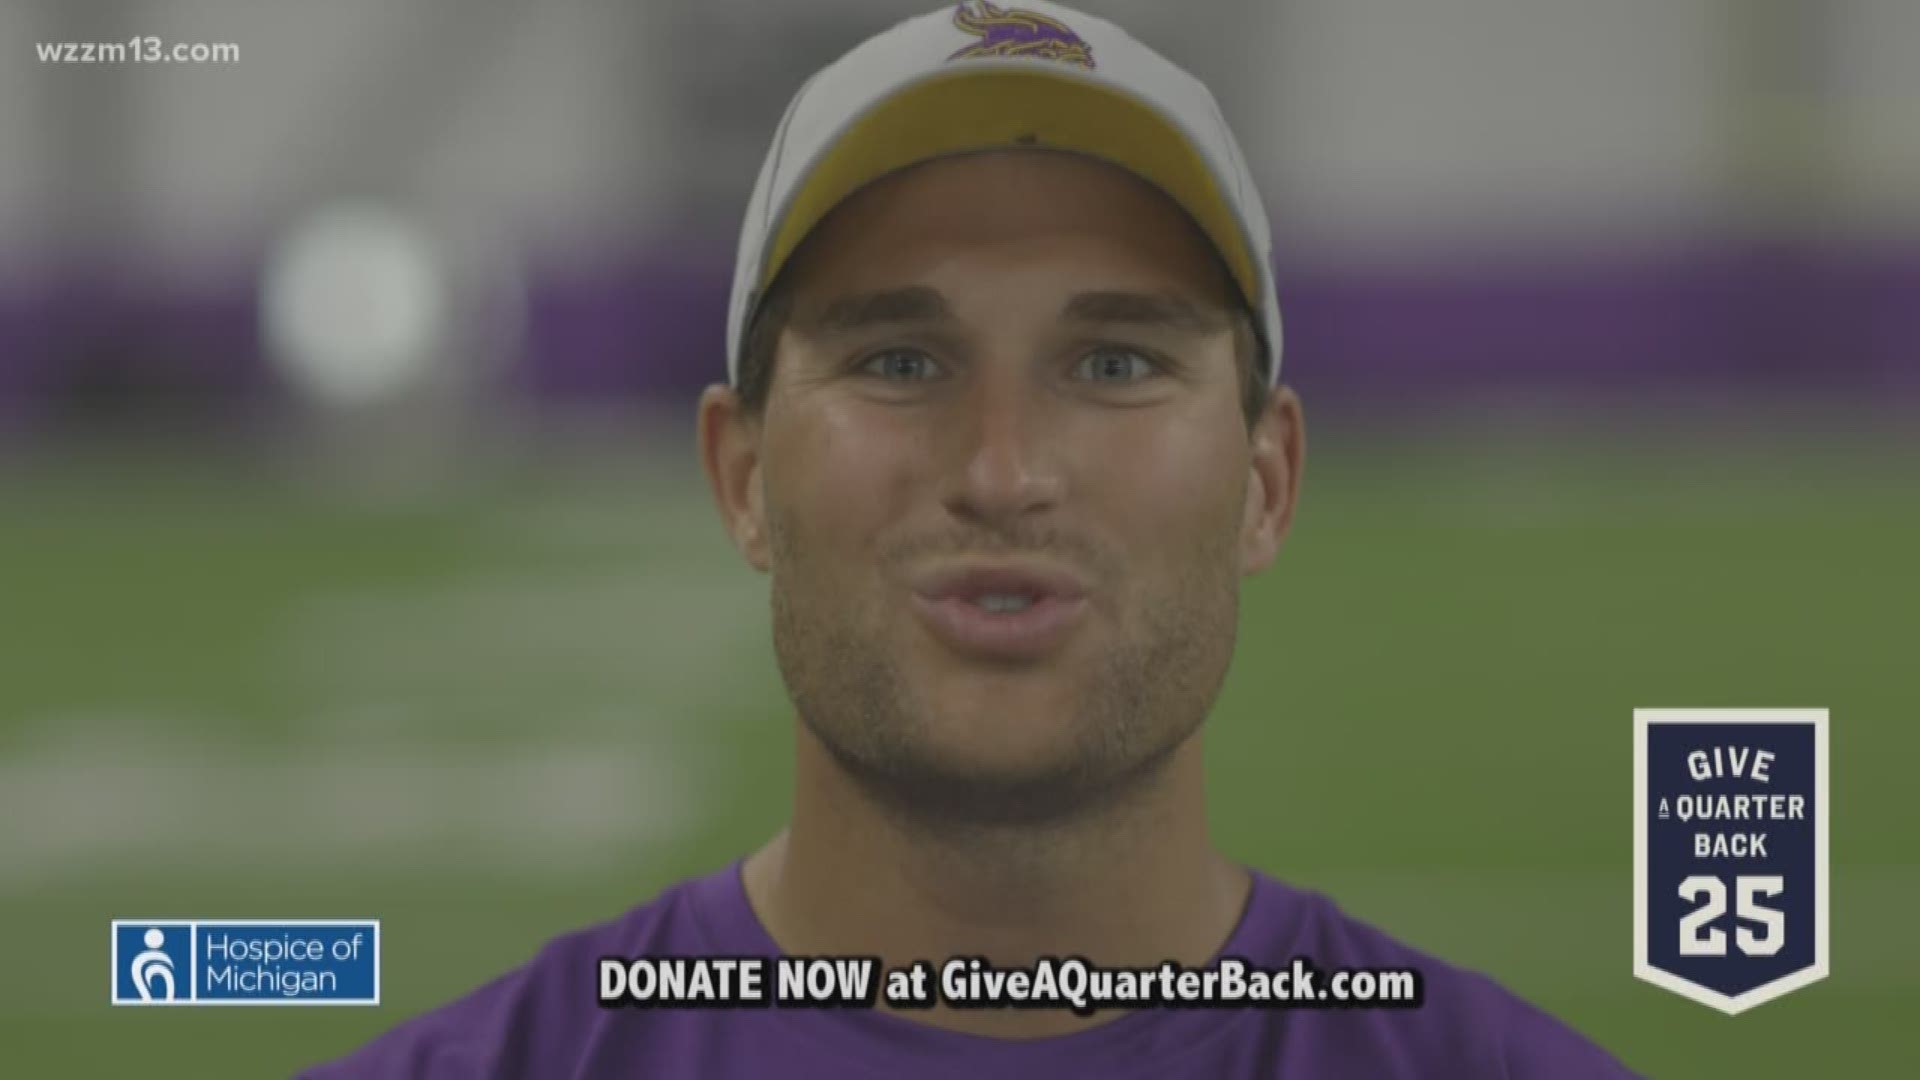 Kirk Cousins opens up about hospice helped his family